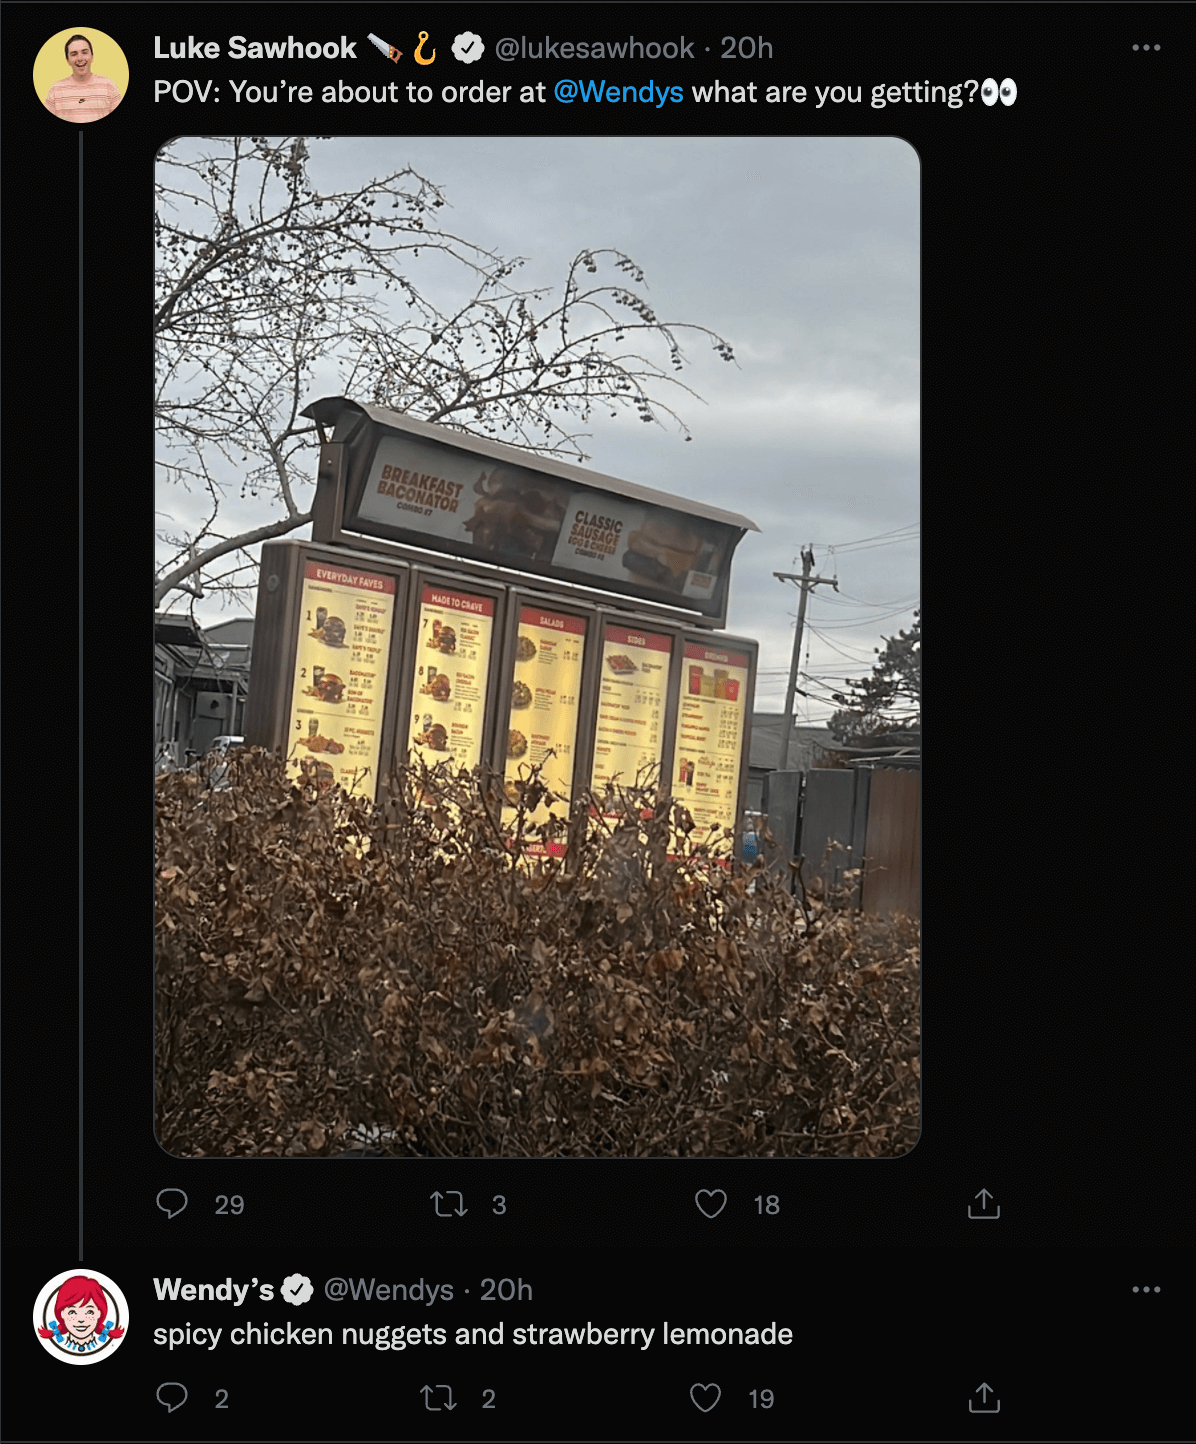 A tweet exchange. Luke Sawhook: POV: You're about to order at @Wendys what are you getting? Wendy's: spicy chicken nuggets and strawberry lemonade